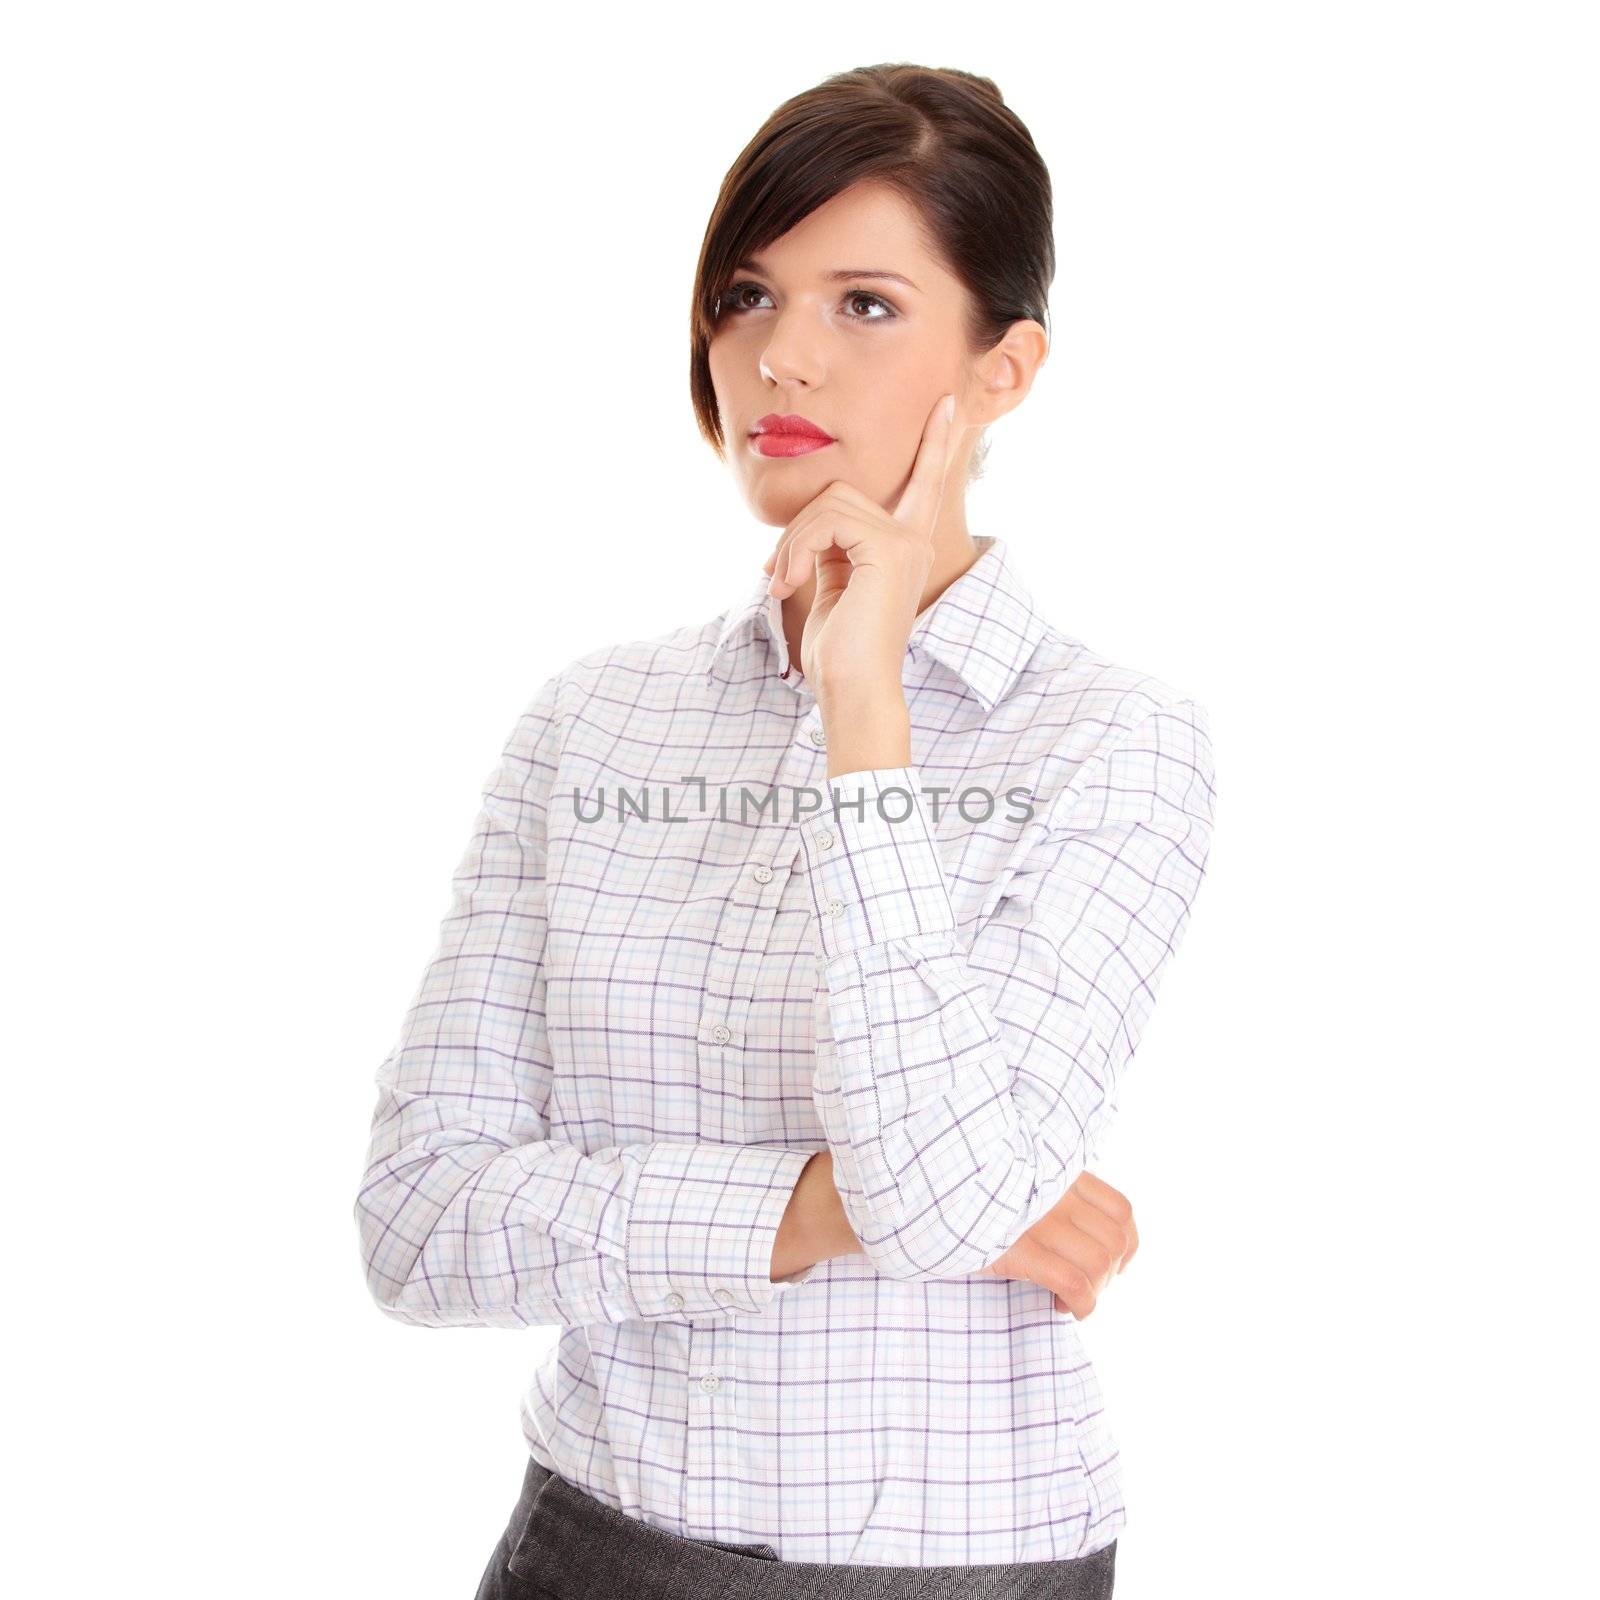 Thoughtful business woman portrait isolated over a white background